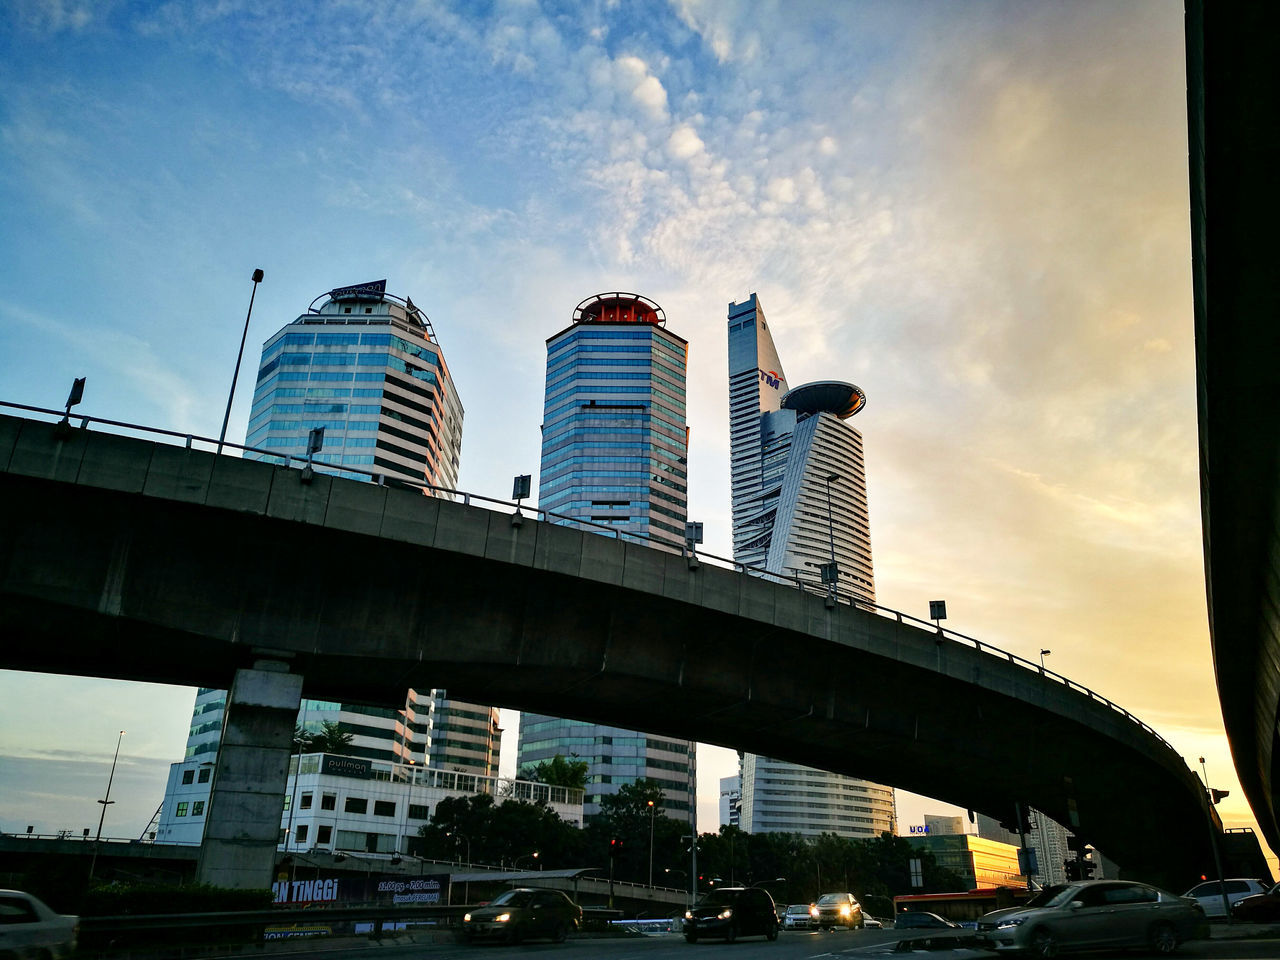 LOW ANGLE VIEW OF SKYSCRAPERS AGAINST SKY